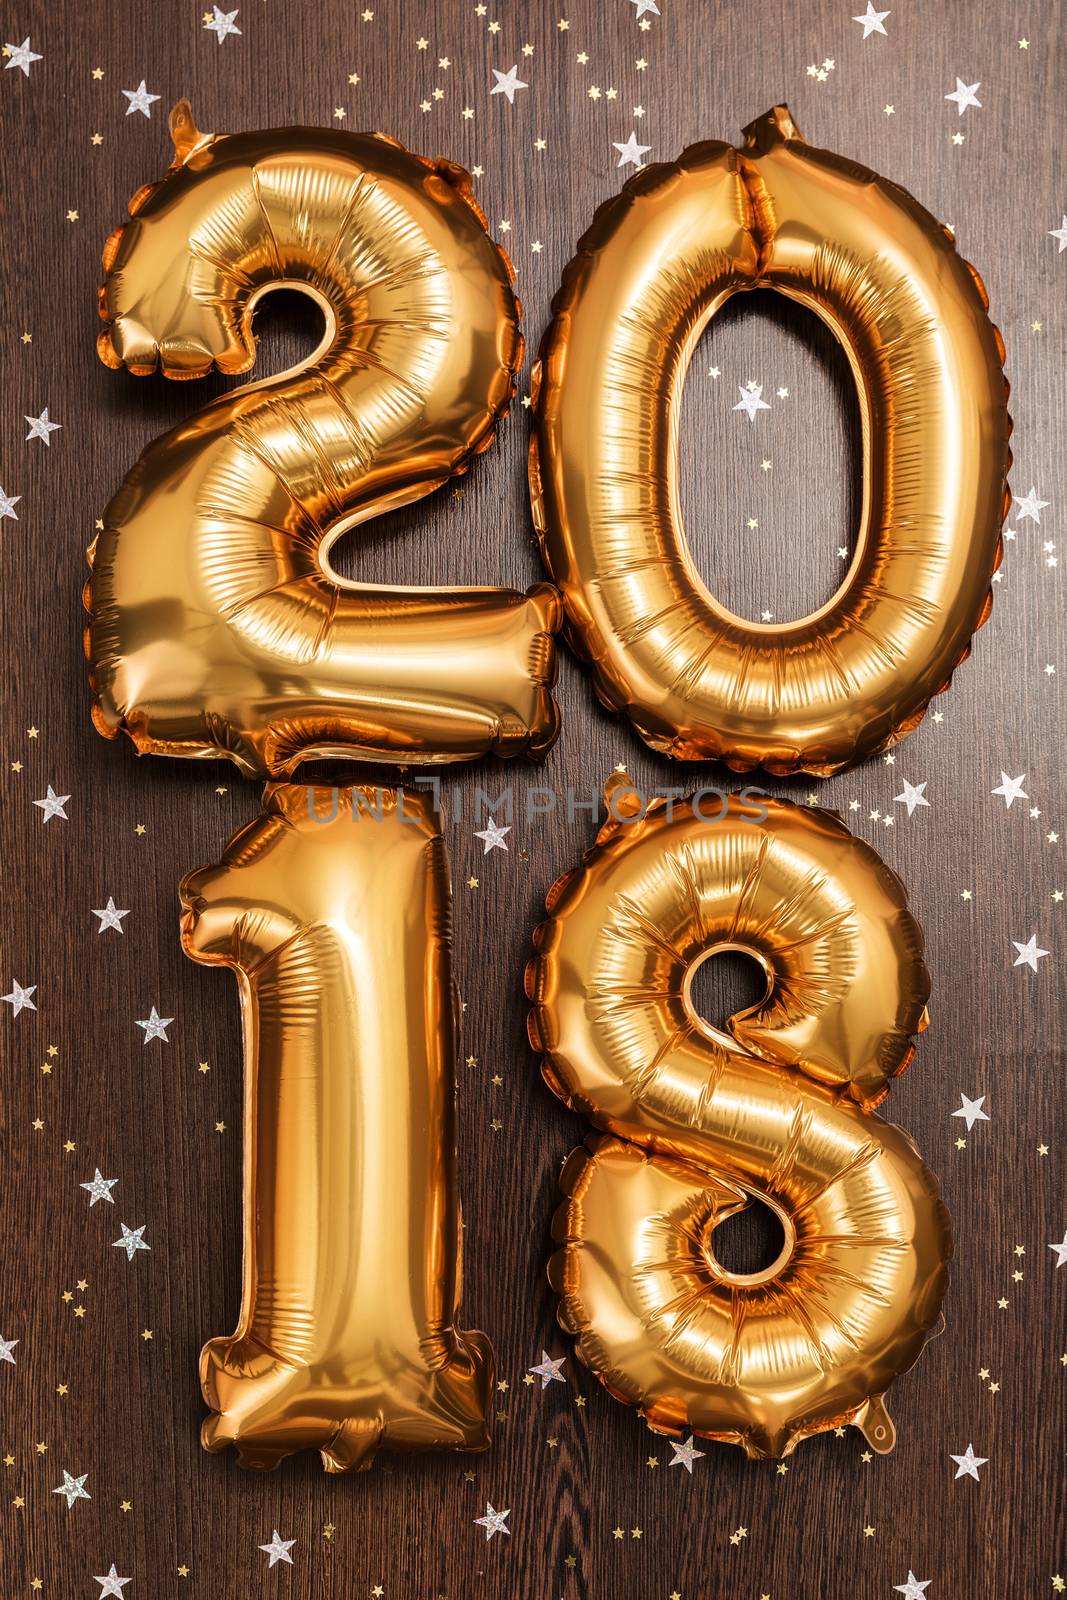 Bright gold balloons figures 2018, New Year Balloons with glitter stars on dark wood table background. Christmas and new year celebration